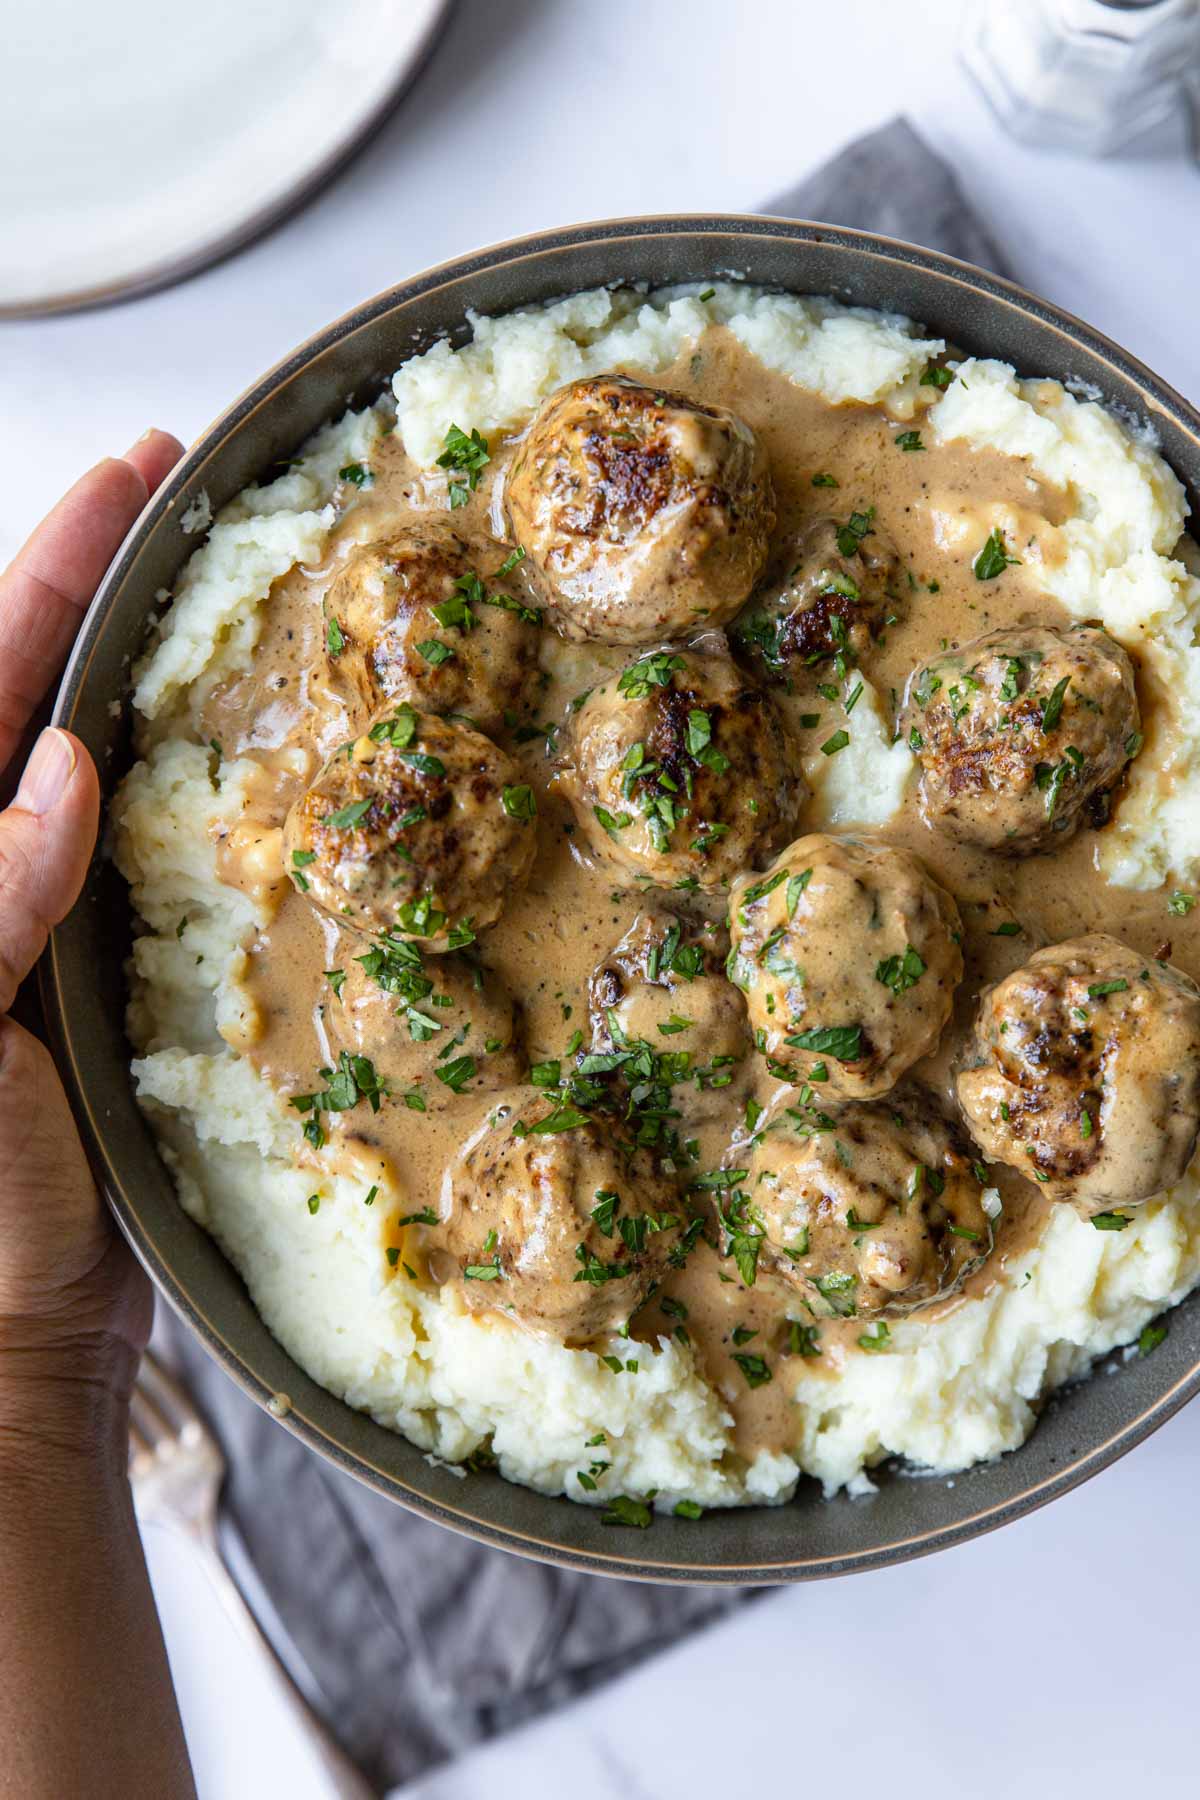 Swedish meatballs and sauce over mashed potatoes in a bowl